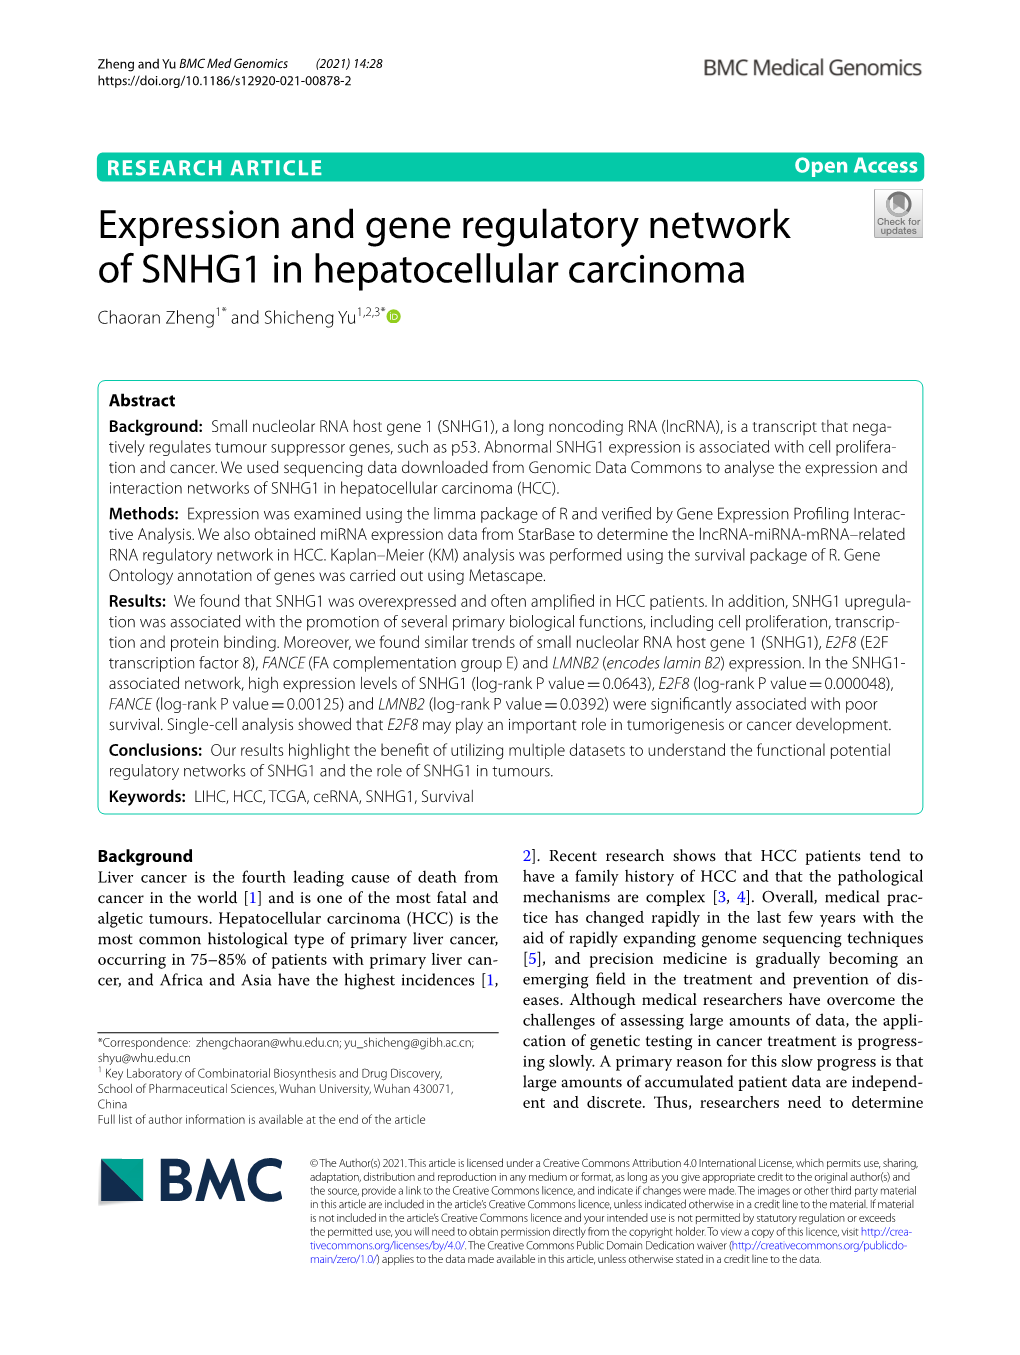 Downloaded from Genomic Data Commons to Analyse the Expression and Interaction Networks of SNHG1 in Hepatocellular Carcinoma (HCC)